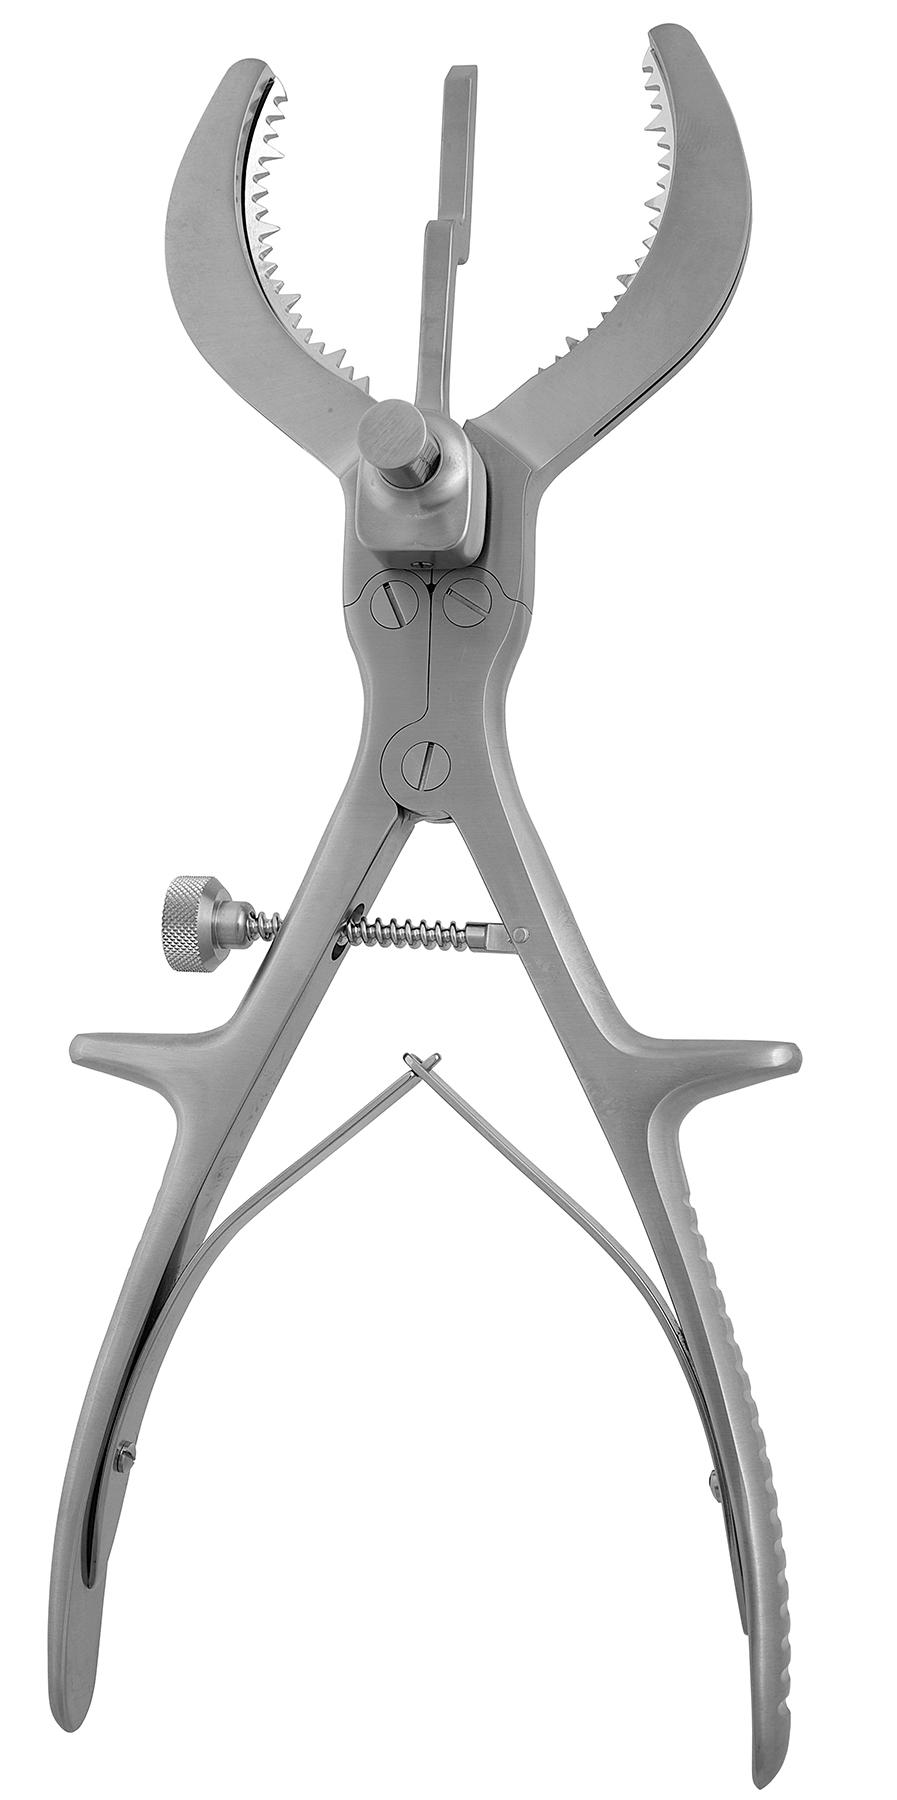 /14 - bone holding Helps in patellar realignment or treatments for patellar fractures and dislocations. The guide is useful for setting the amount of resection needed.